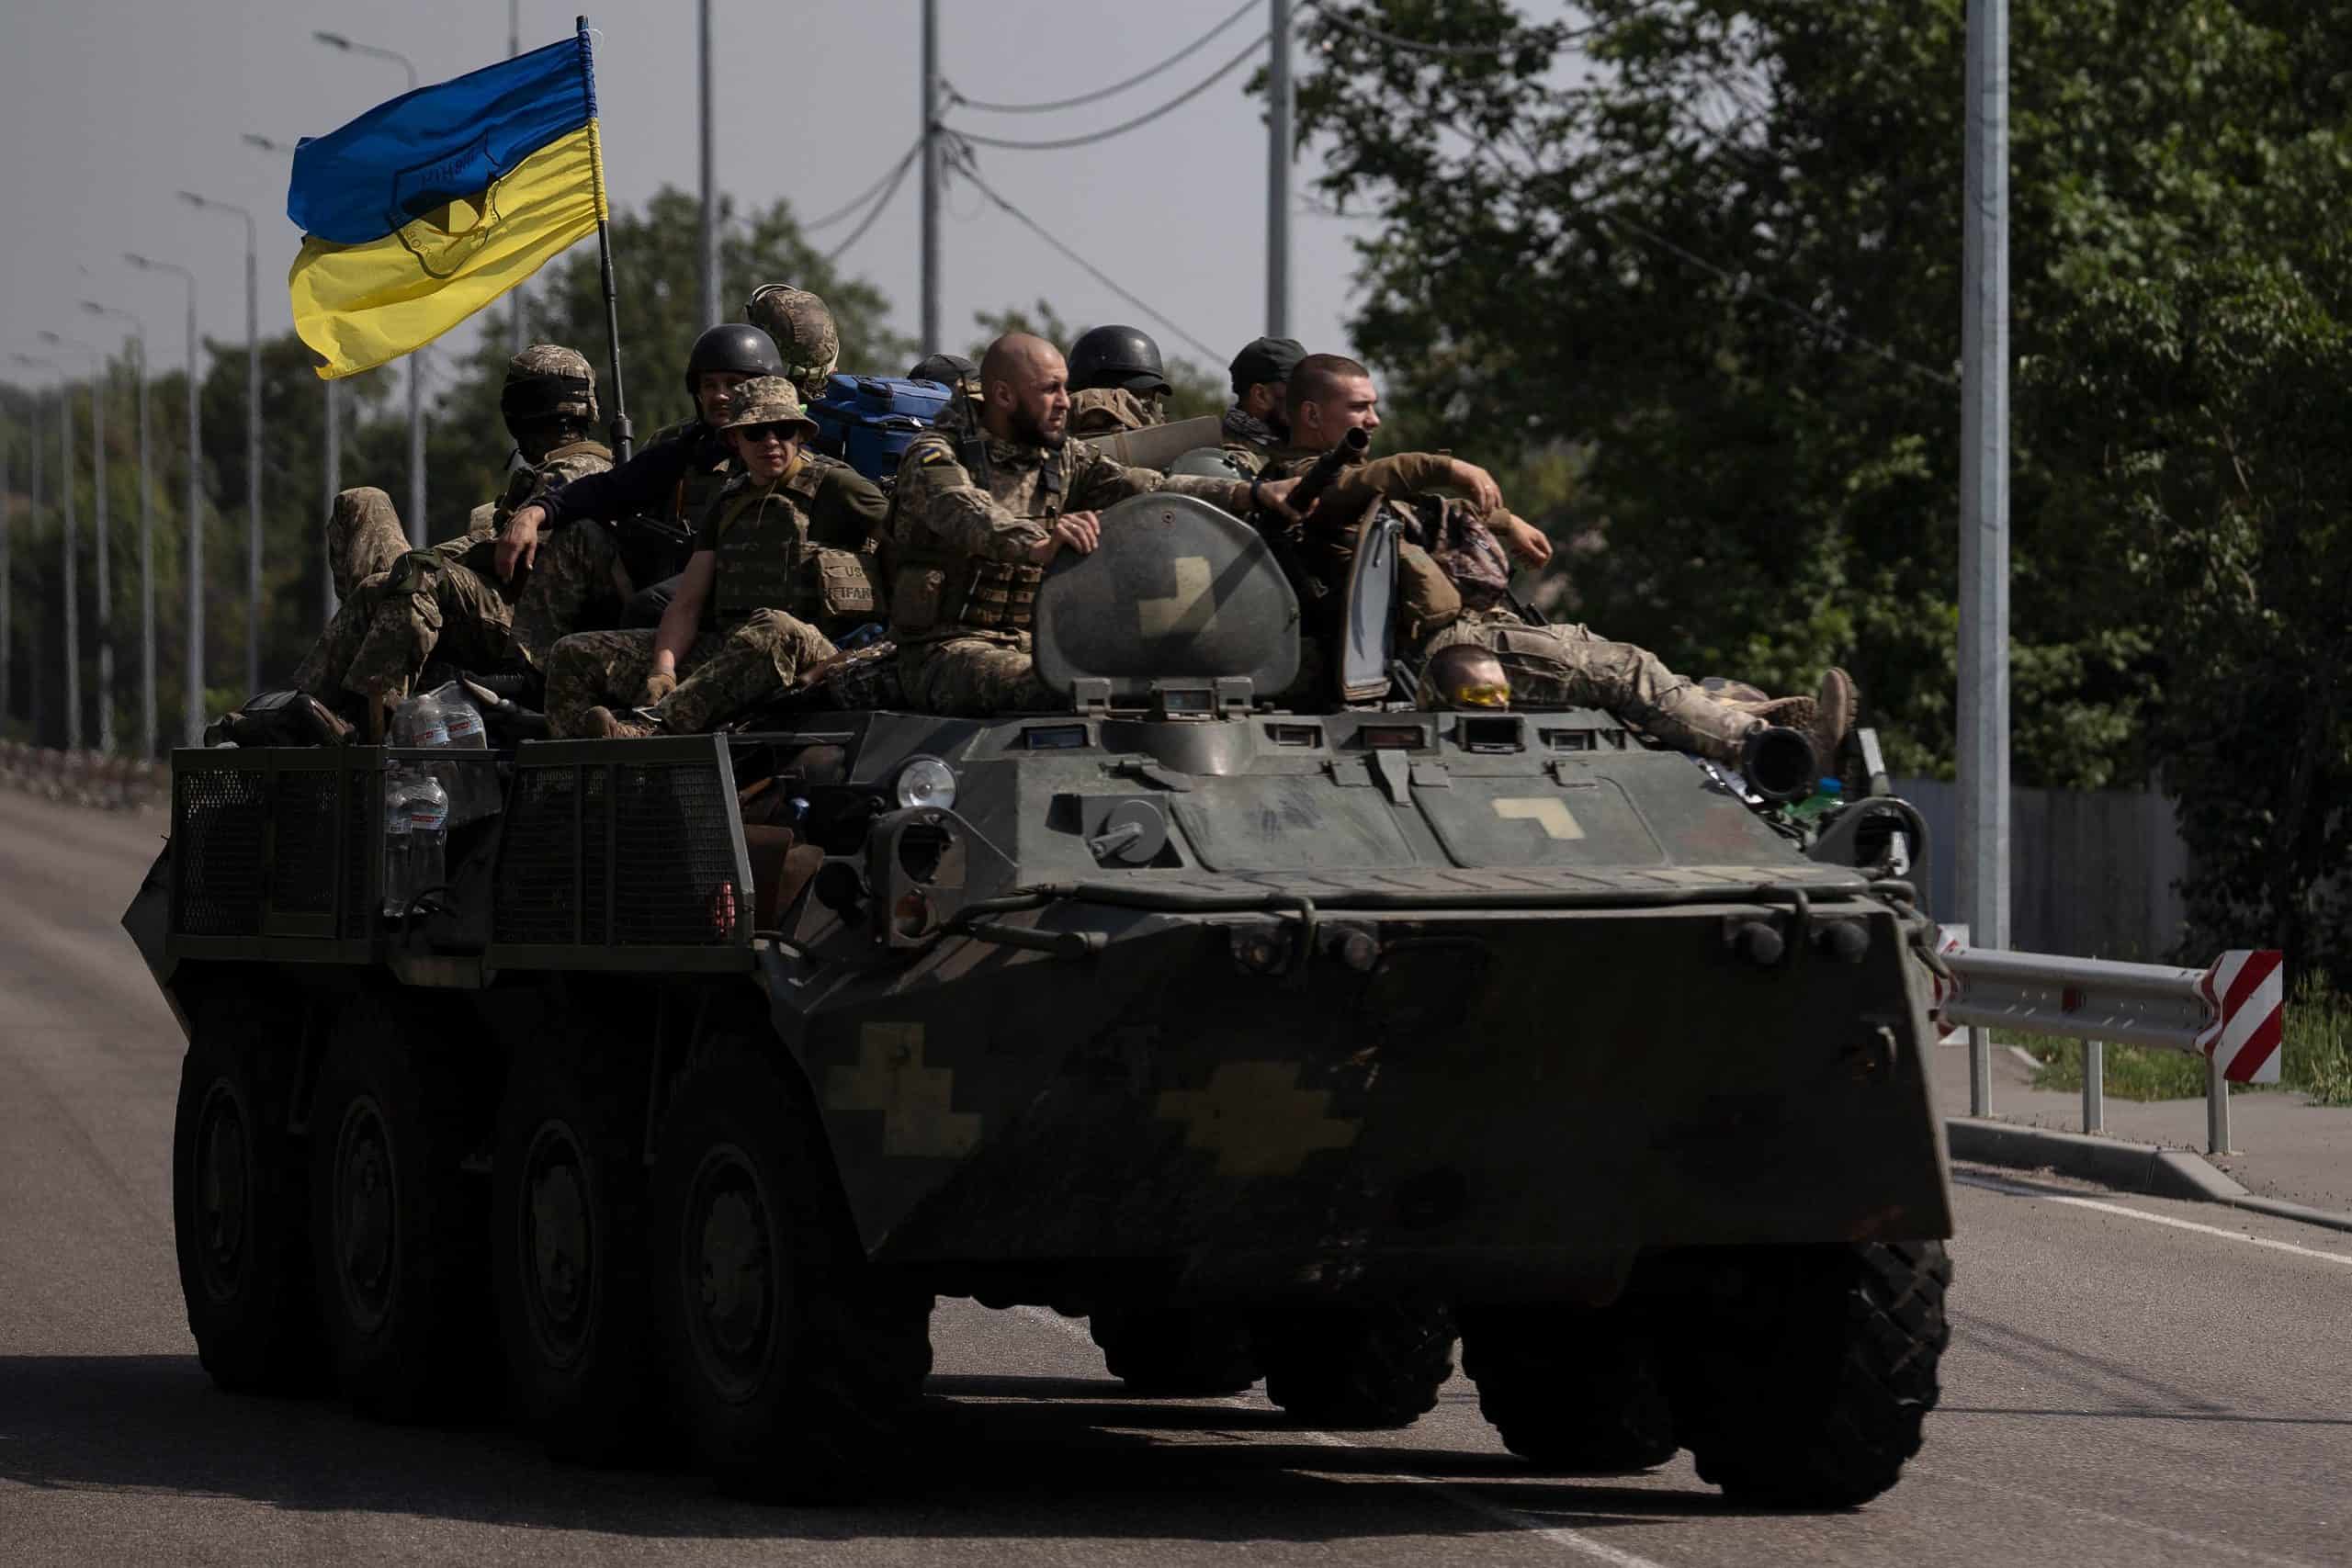 ‘Momentous day for Ukraine’: Major counter-offensive as war marks 200 days